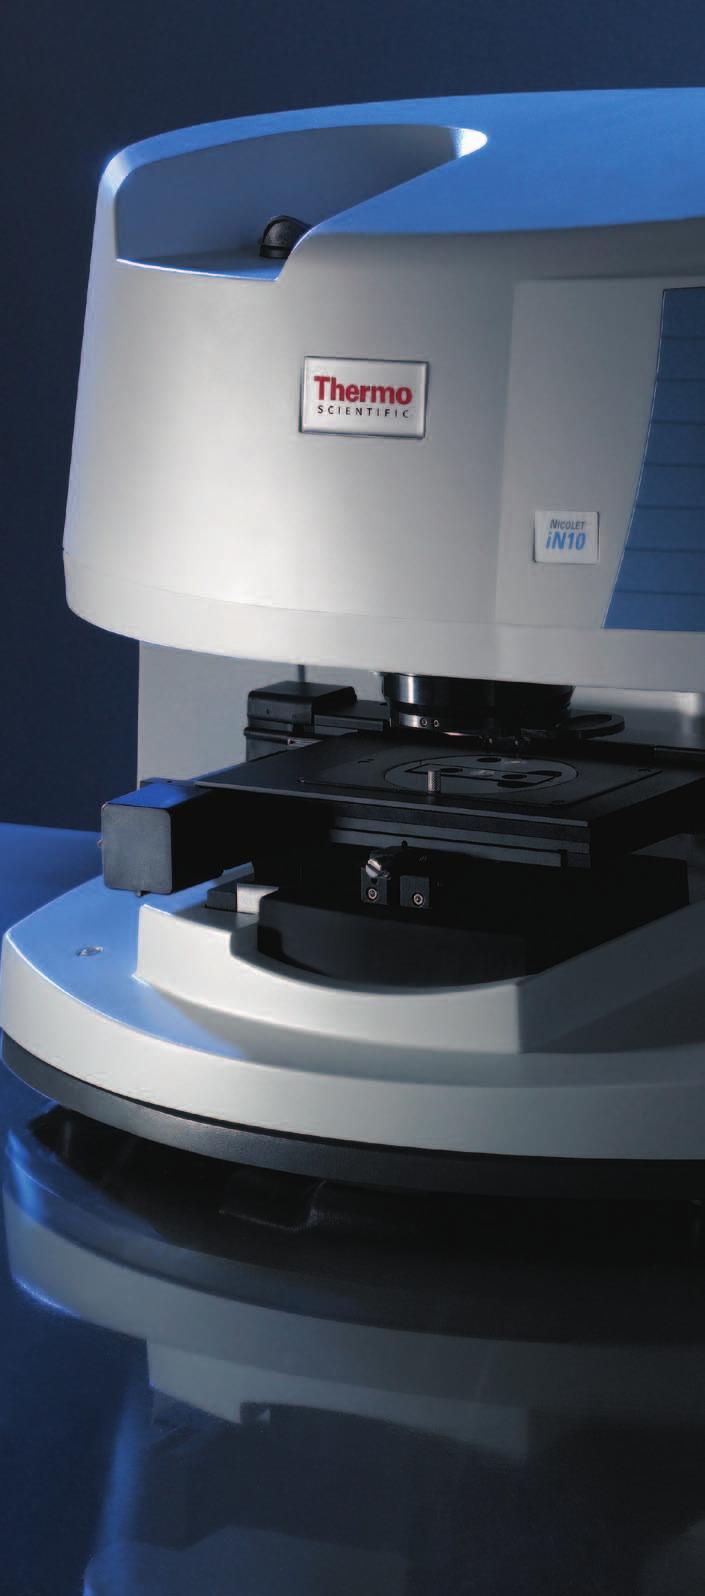 Nicolet in10 Microscopy Redefined The Thermo Scientific Nicolet in10 FT-IR microscope is integrated, innovative and intuitive beyond what you have come to expect from an infrared microscope.